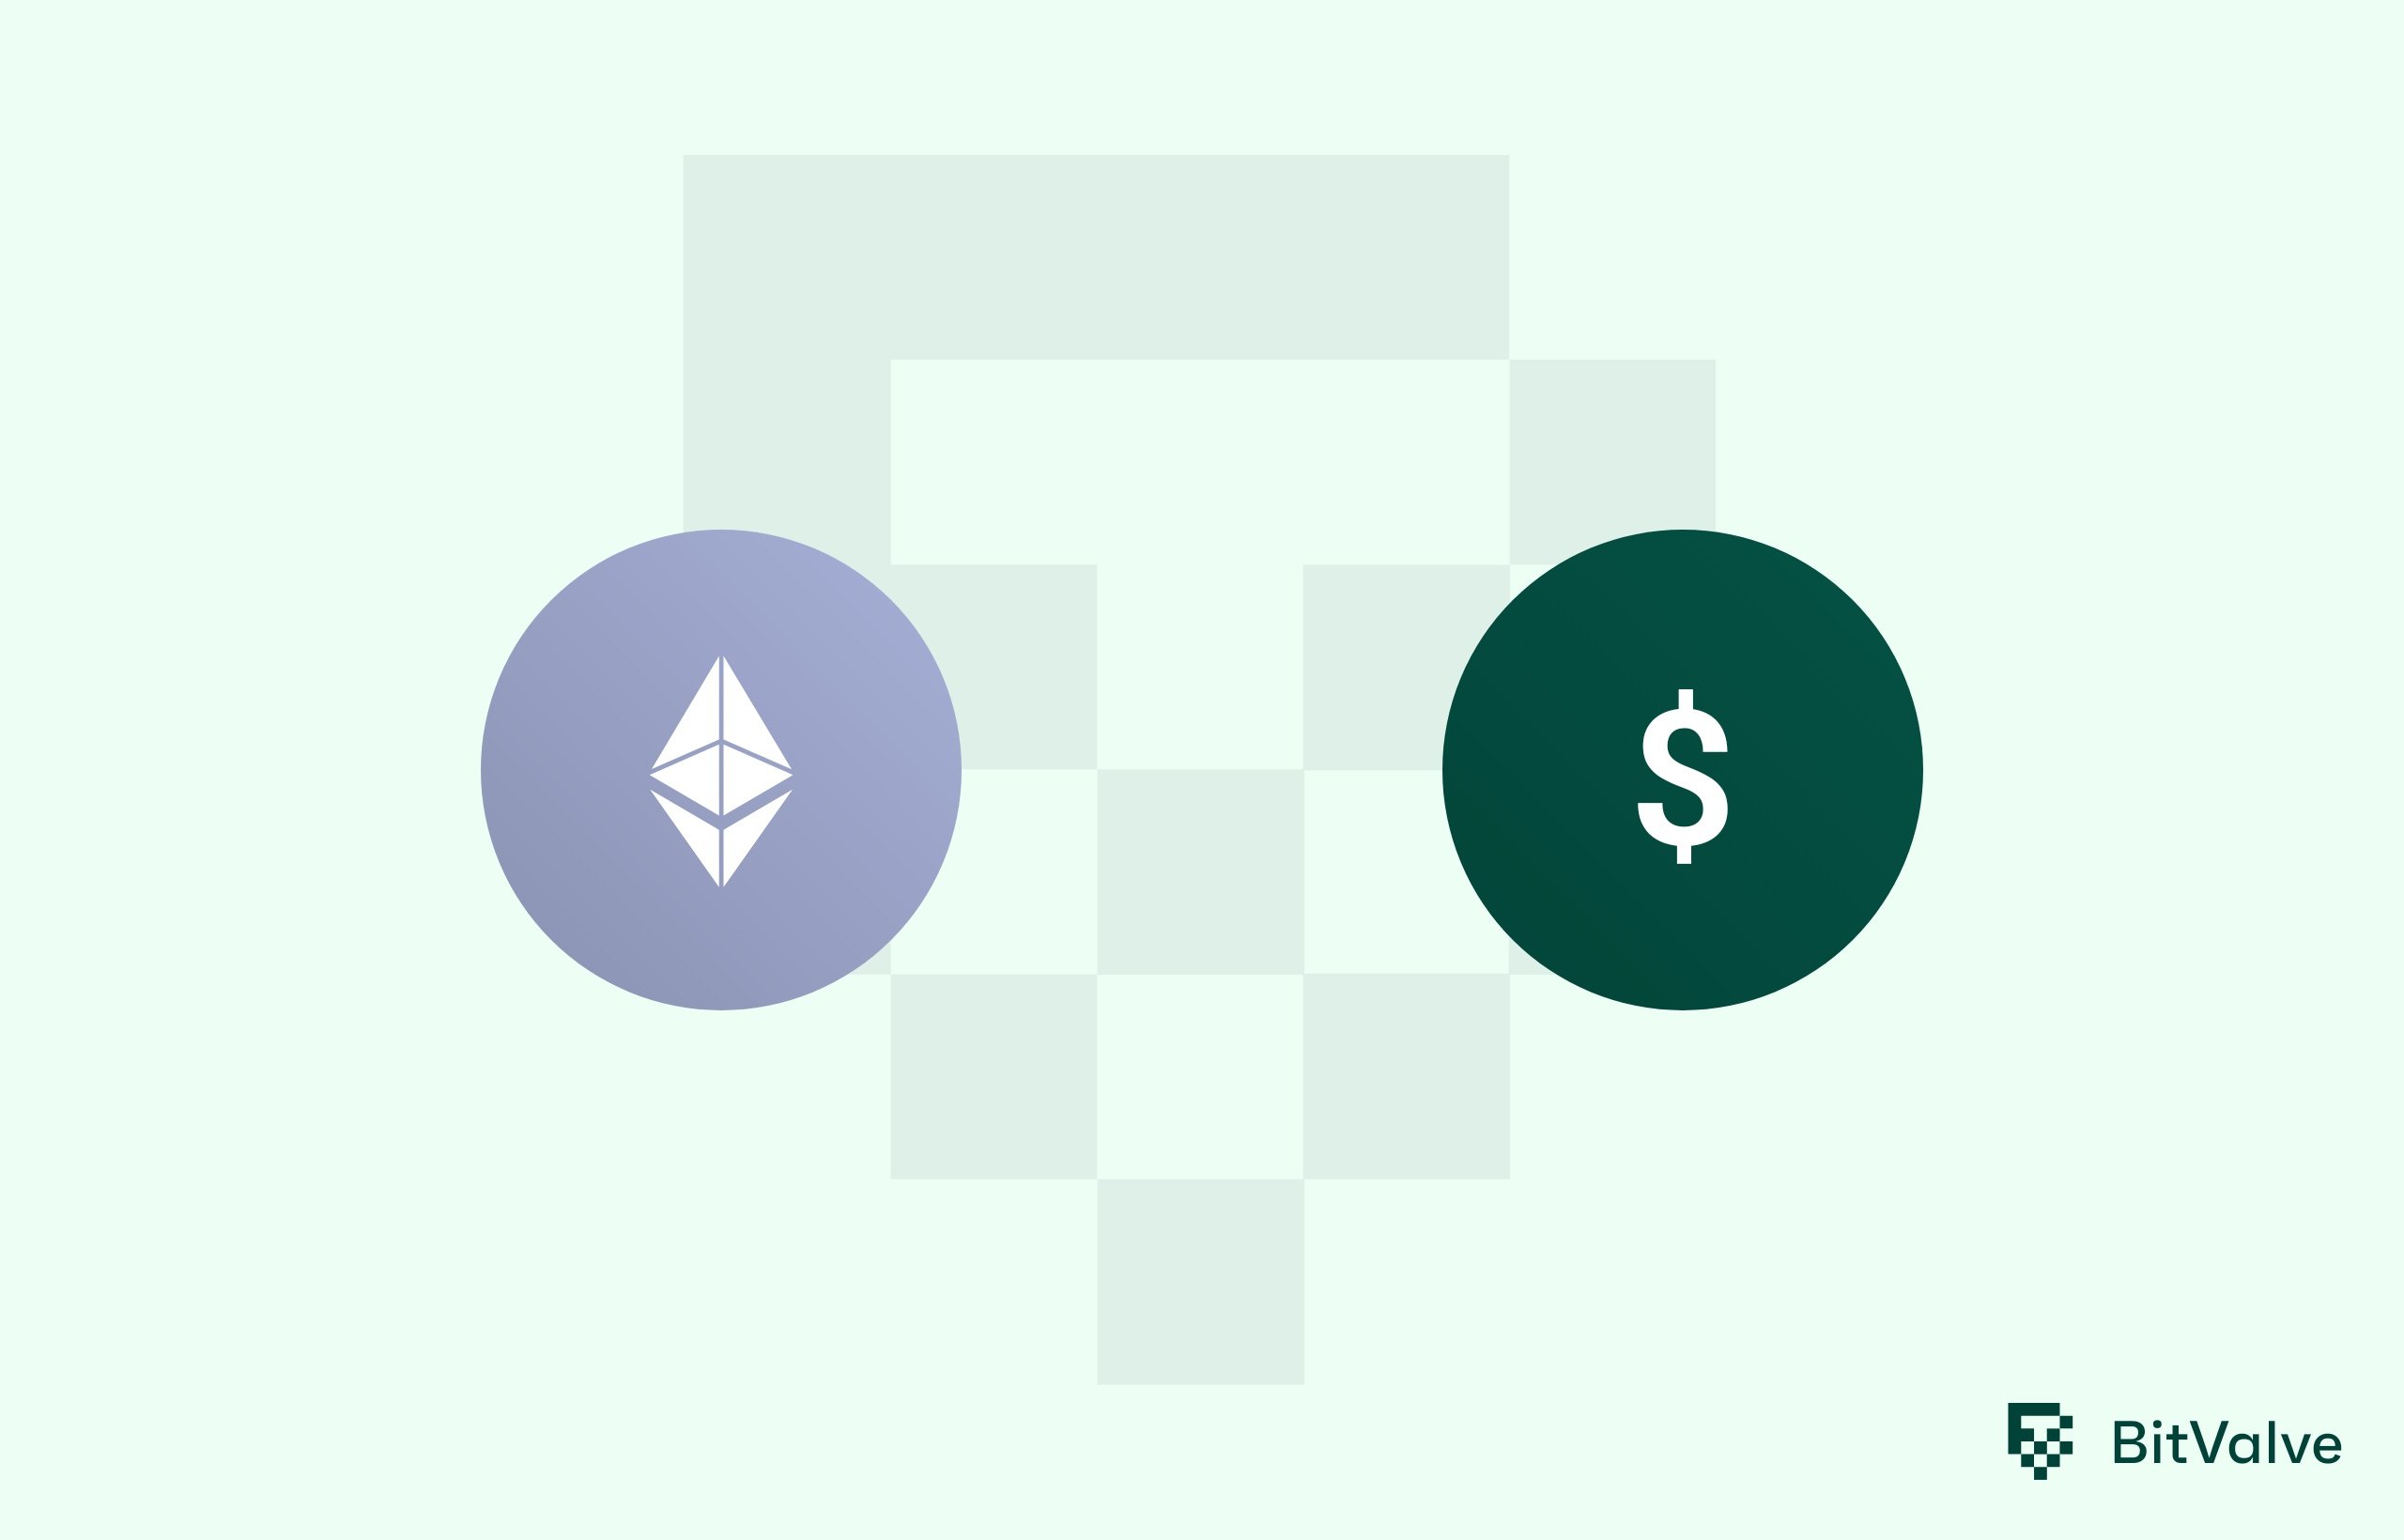 1 ETH to USD - Ethereum to US Dollars Exchange Rate